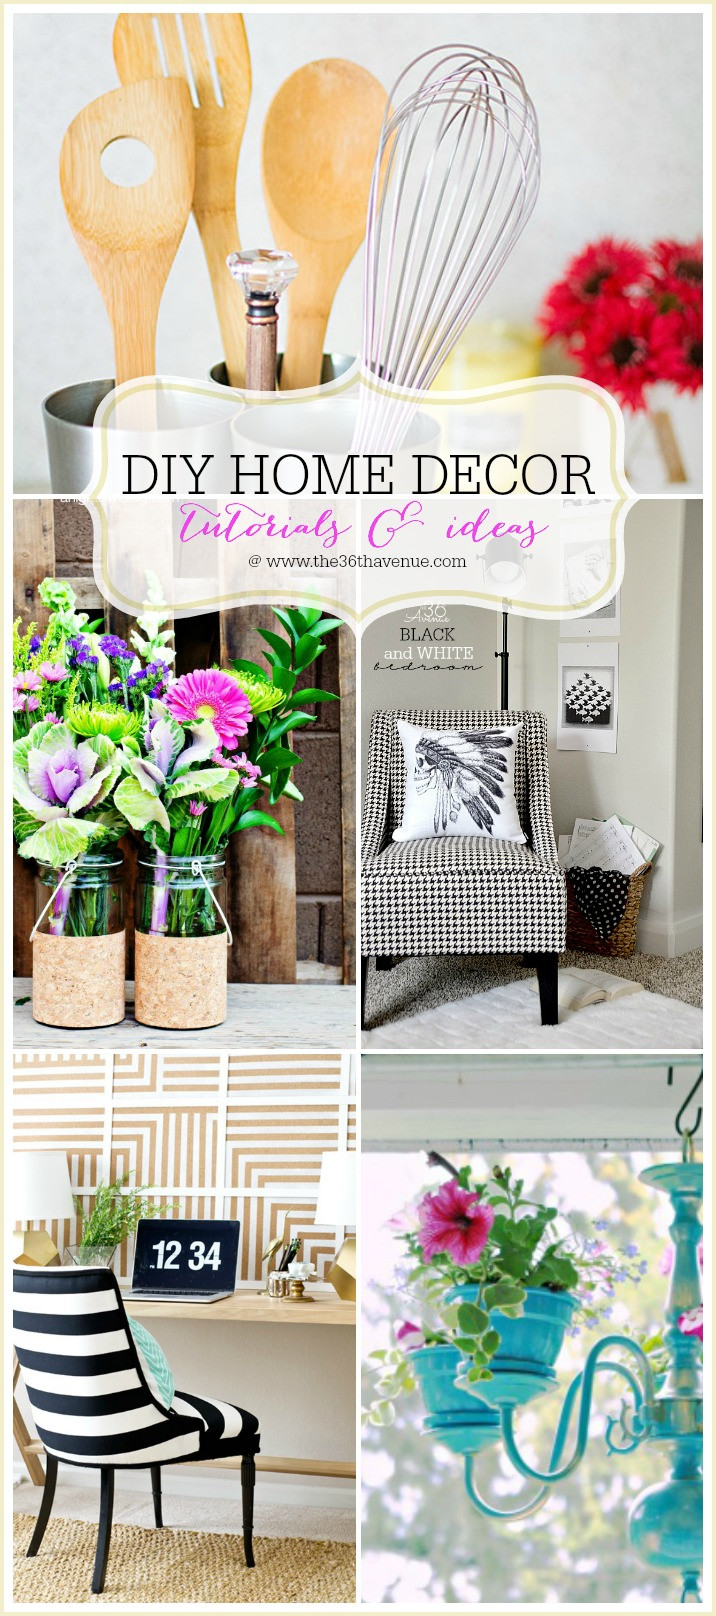 Home Decorating DIY
 Home Decor DIY Projects The 36th AVENUE